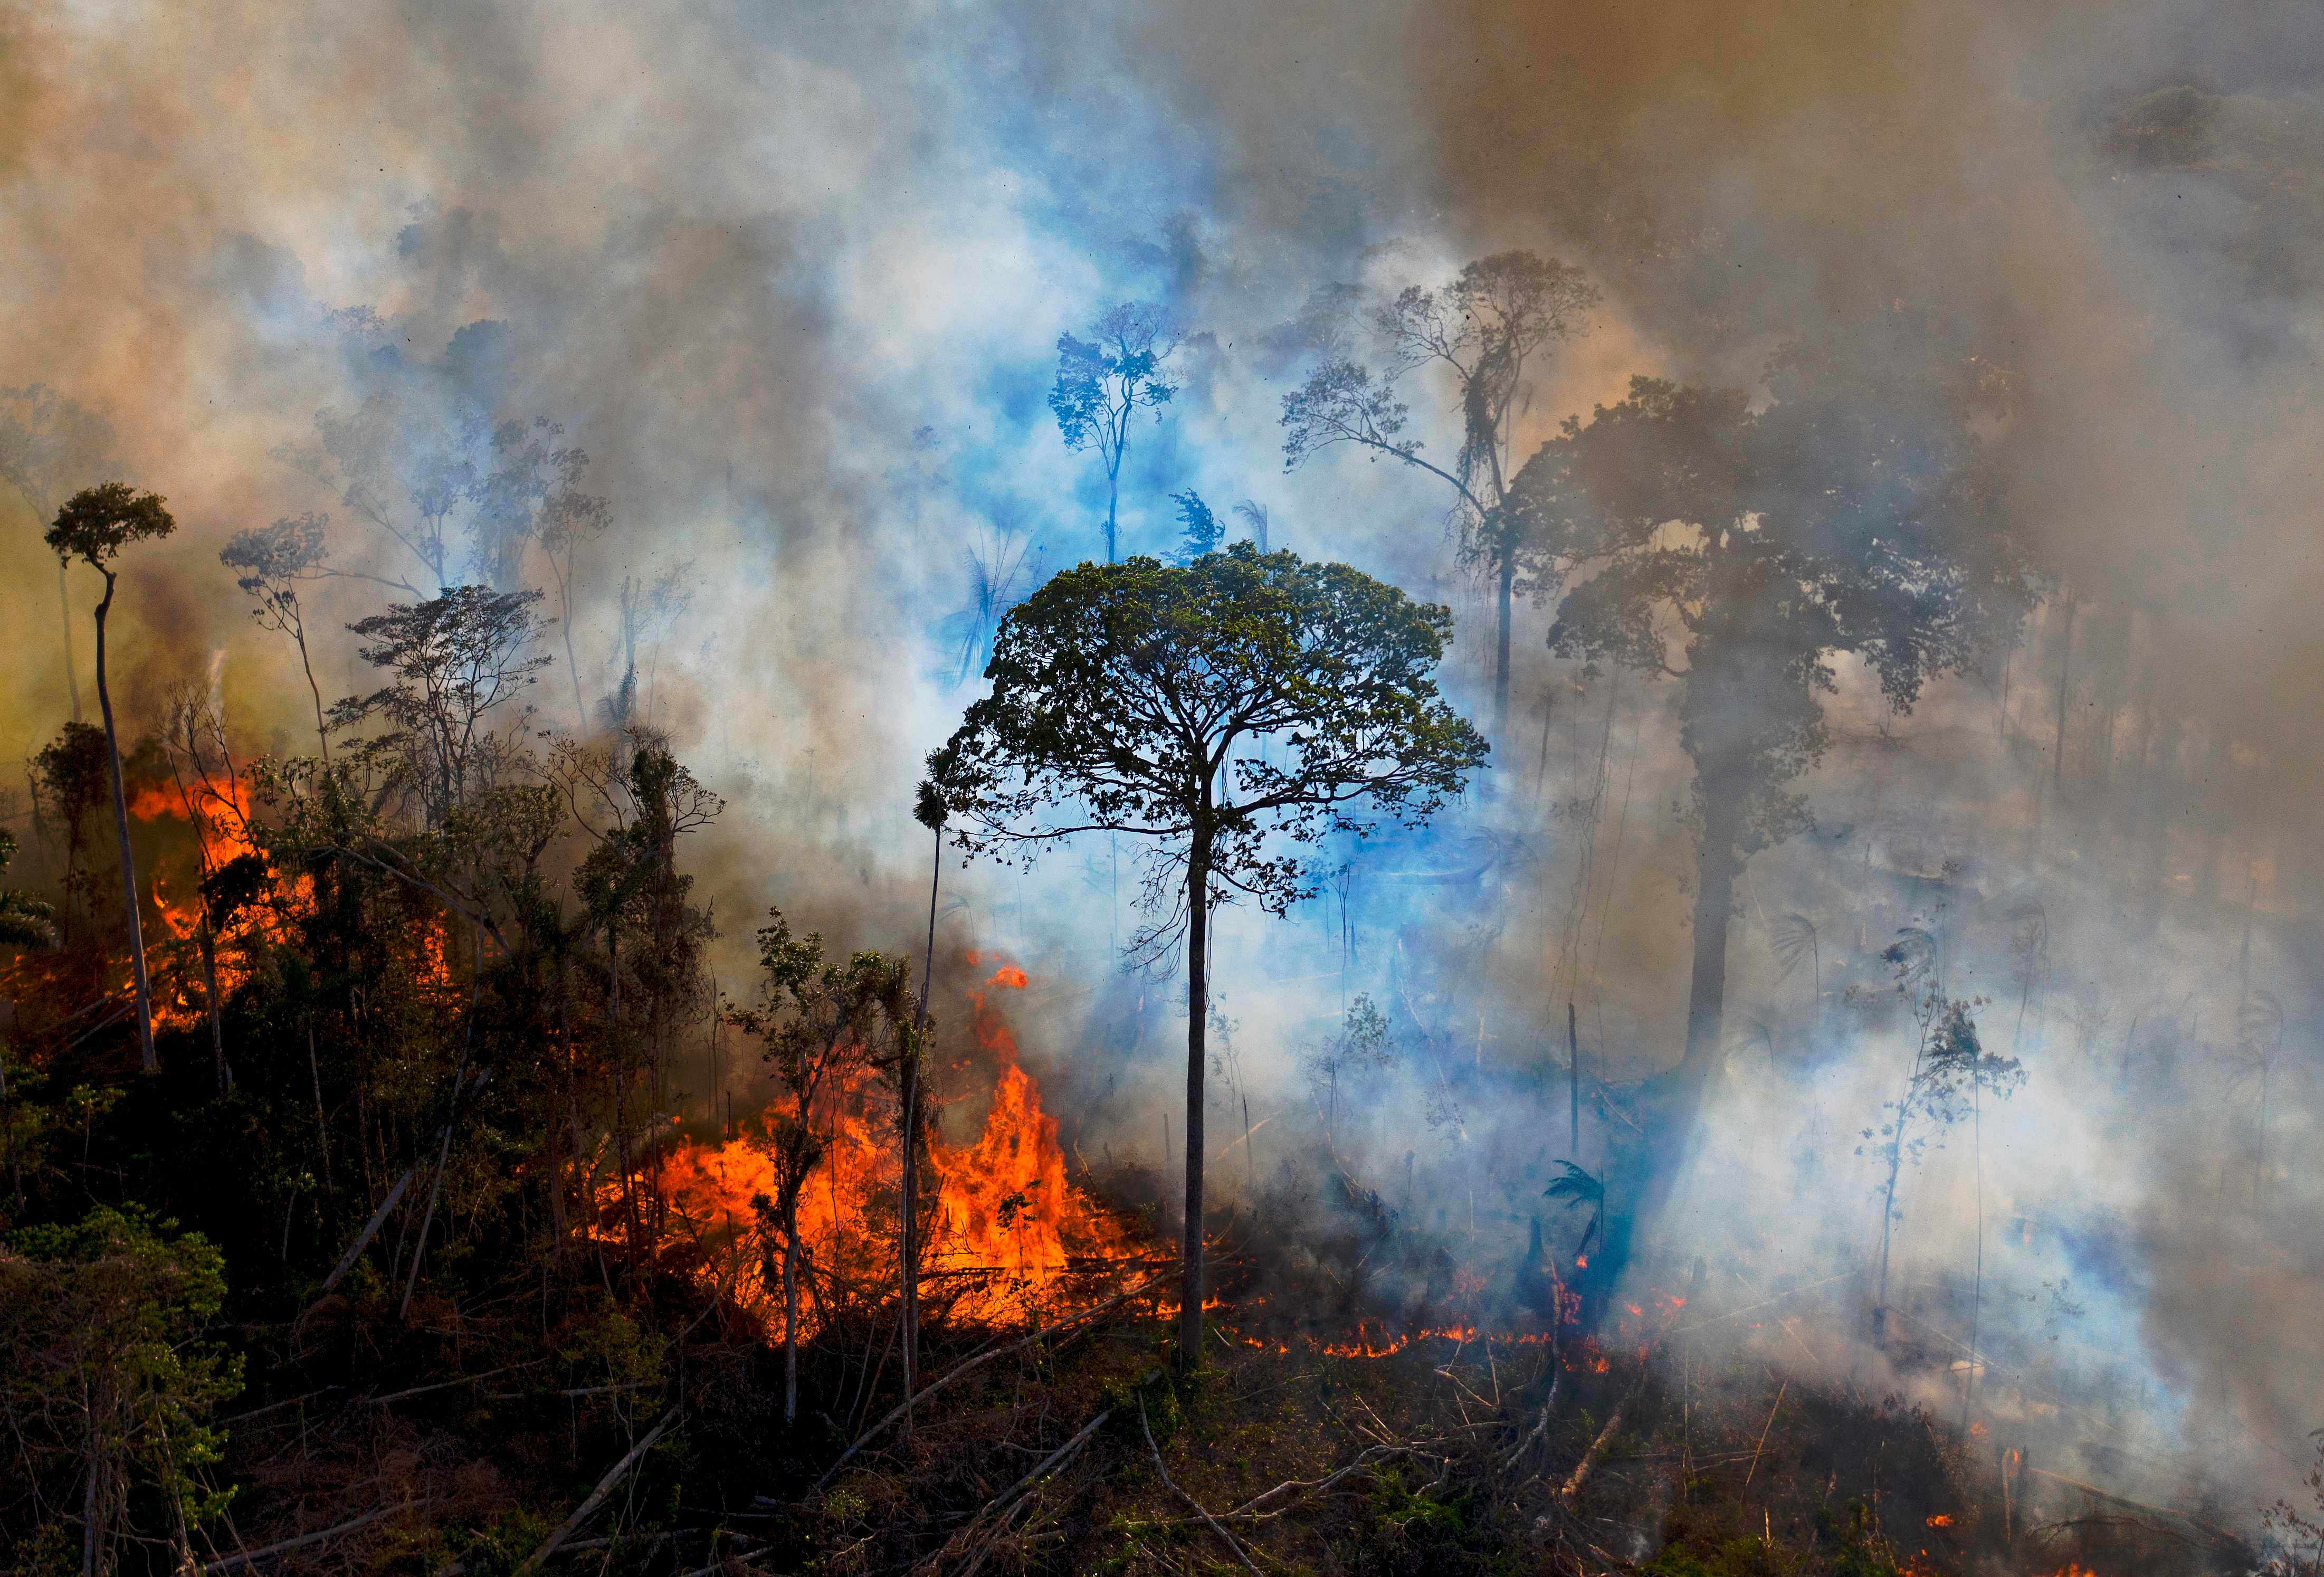 There were a record number of fires in the Amazon last summer